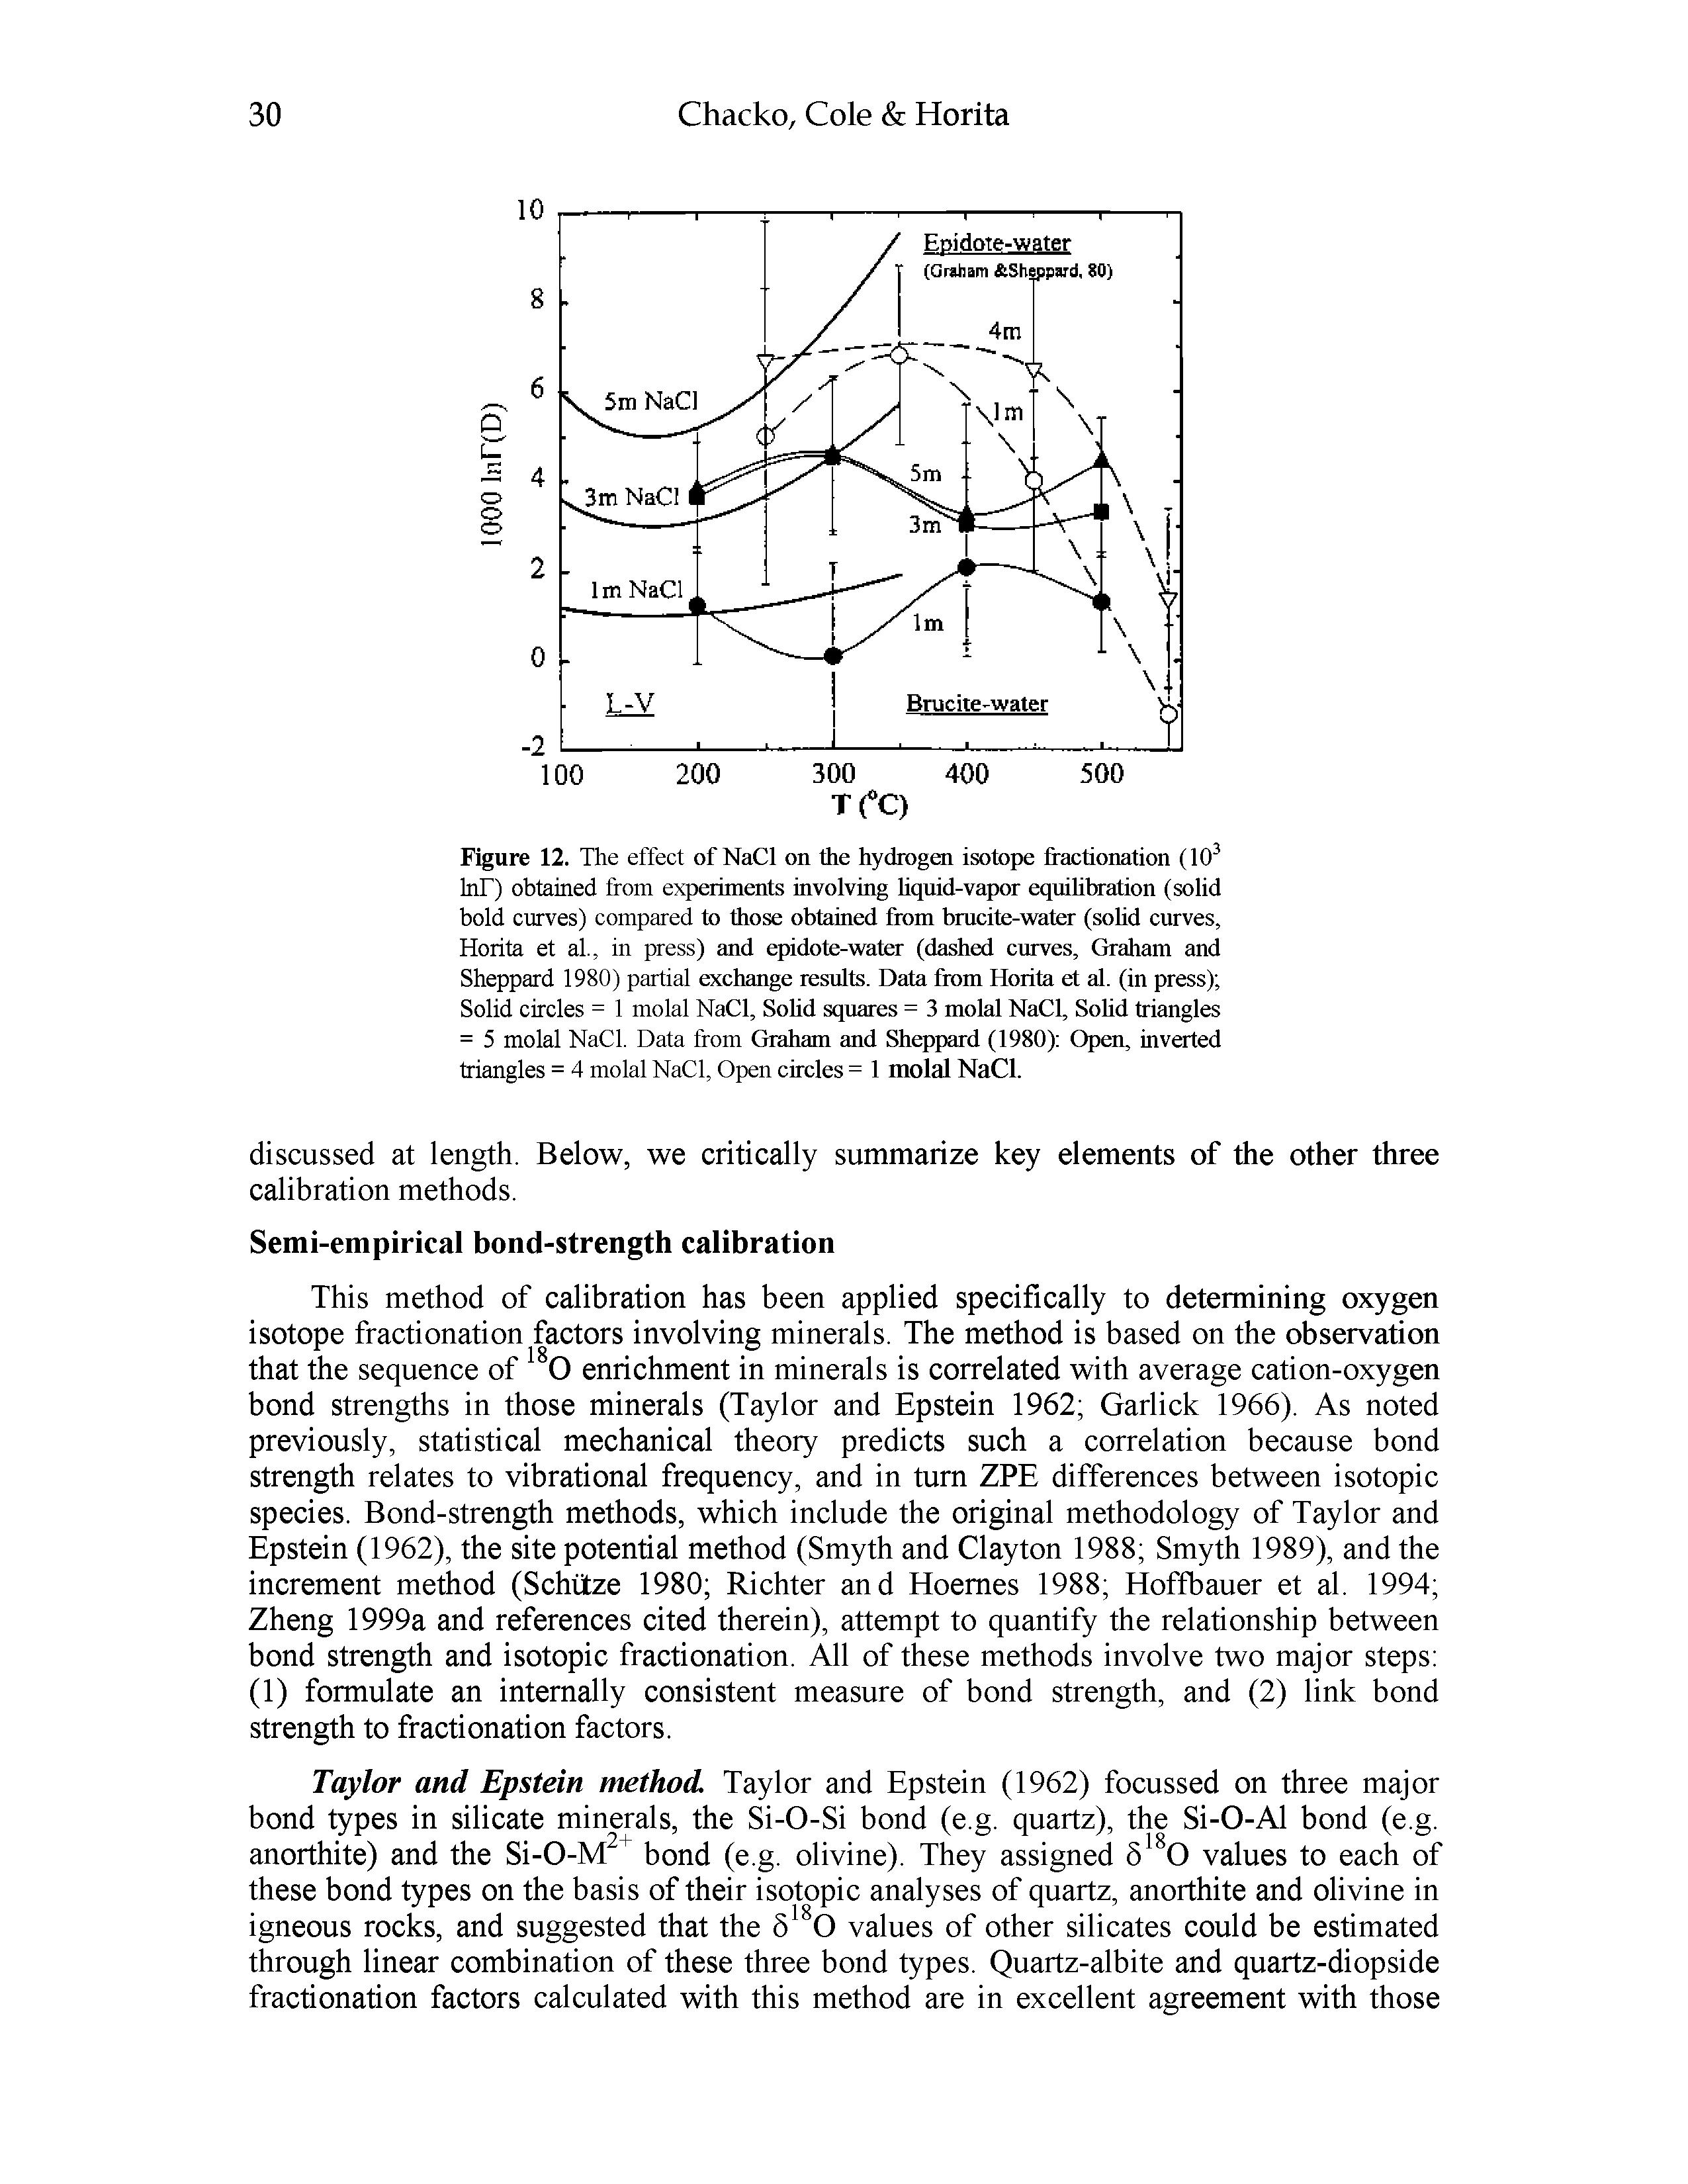 Figure 12. The effect of NaCl on the hydrogen isotope fractionation (10 InF) obtained from experiments involving liquid-vapor equilibration (solid bold curves) compared to those obtained from brucite-water (solid curves, Horita et al., in press) and epidote-water (dashed curves, Graham and Sheppard 1980) partial exchange results. Data from Horita et al. (in press) Solid circles = 1 molal NaCl, Sohd squares = 3 molal NaCl, Sohd triangles = 5 molal NaCl. Data from Graham and Sheppard (1980) Open, inverted triangles = 4 molal NaCl, Open circles = 1 molal NaCl.